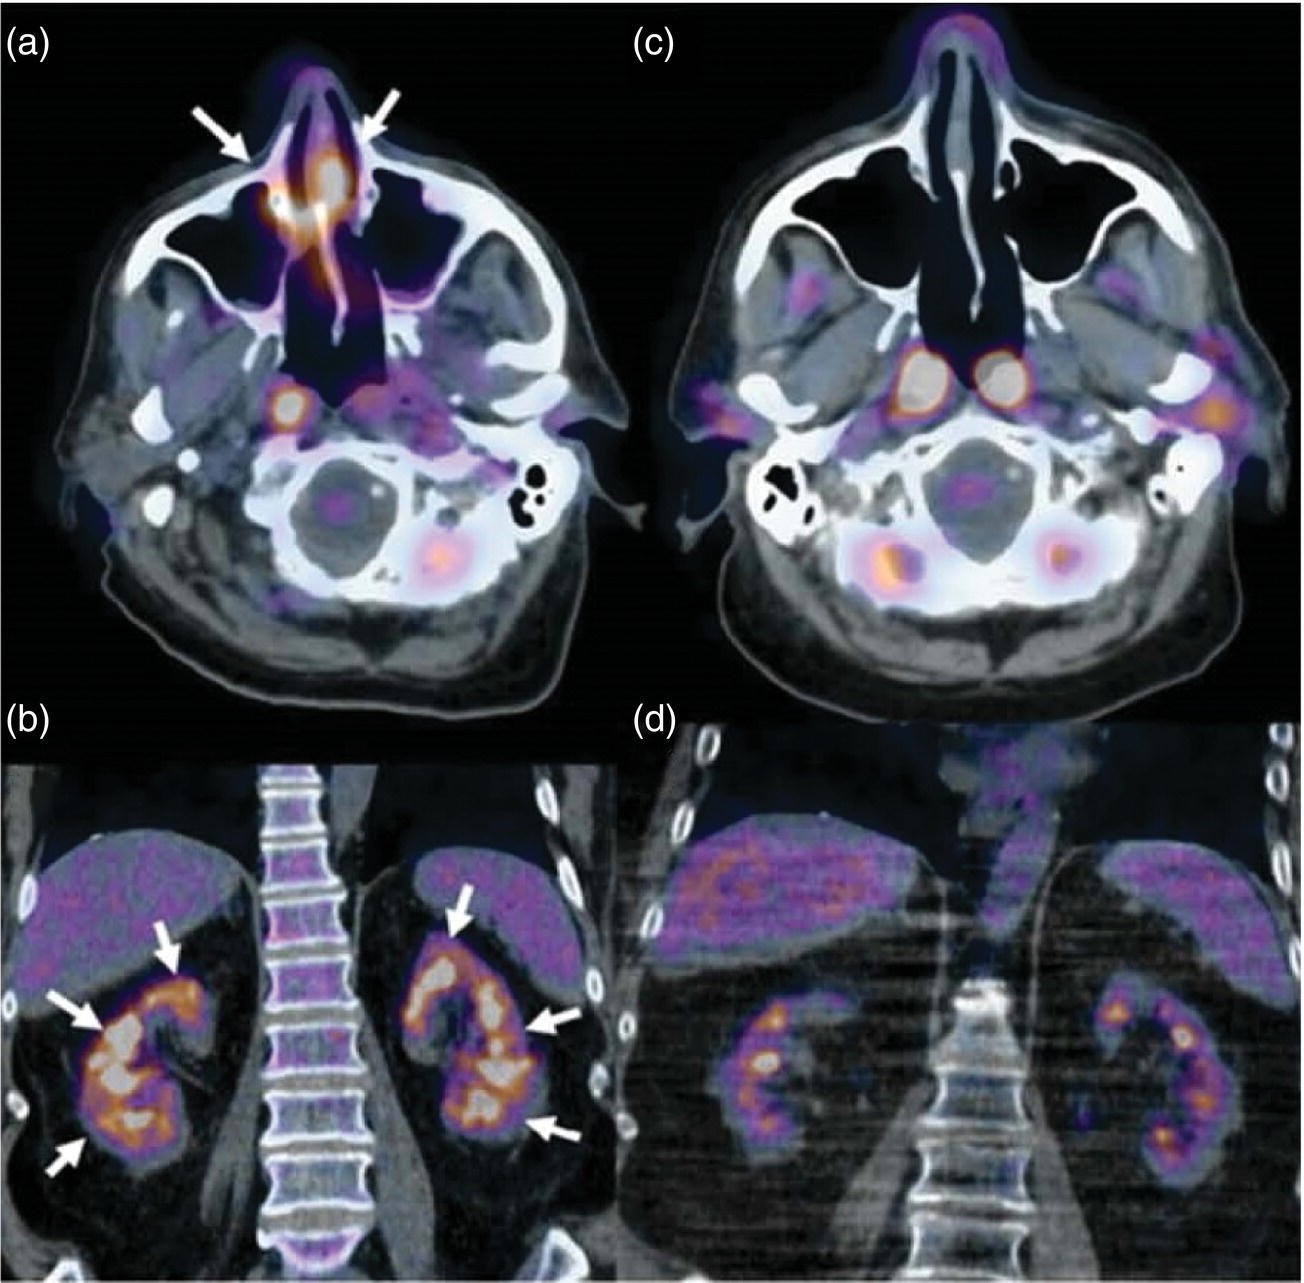 Schematic illustration of a 67-year-old woman with a granulomatosis with polyangiitis. FDG PET/CT scan shows increased FDG uptake in sinonasal and kidney locations (A and B, arrows). A follow-up FDG PET/CT scan, although the patient achieved remission, showed resolution of hypermetabolic activities in both locations (C and D).